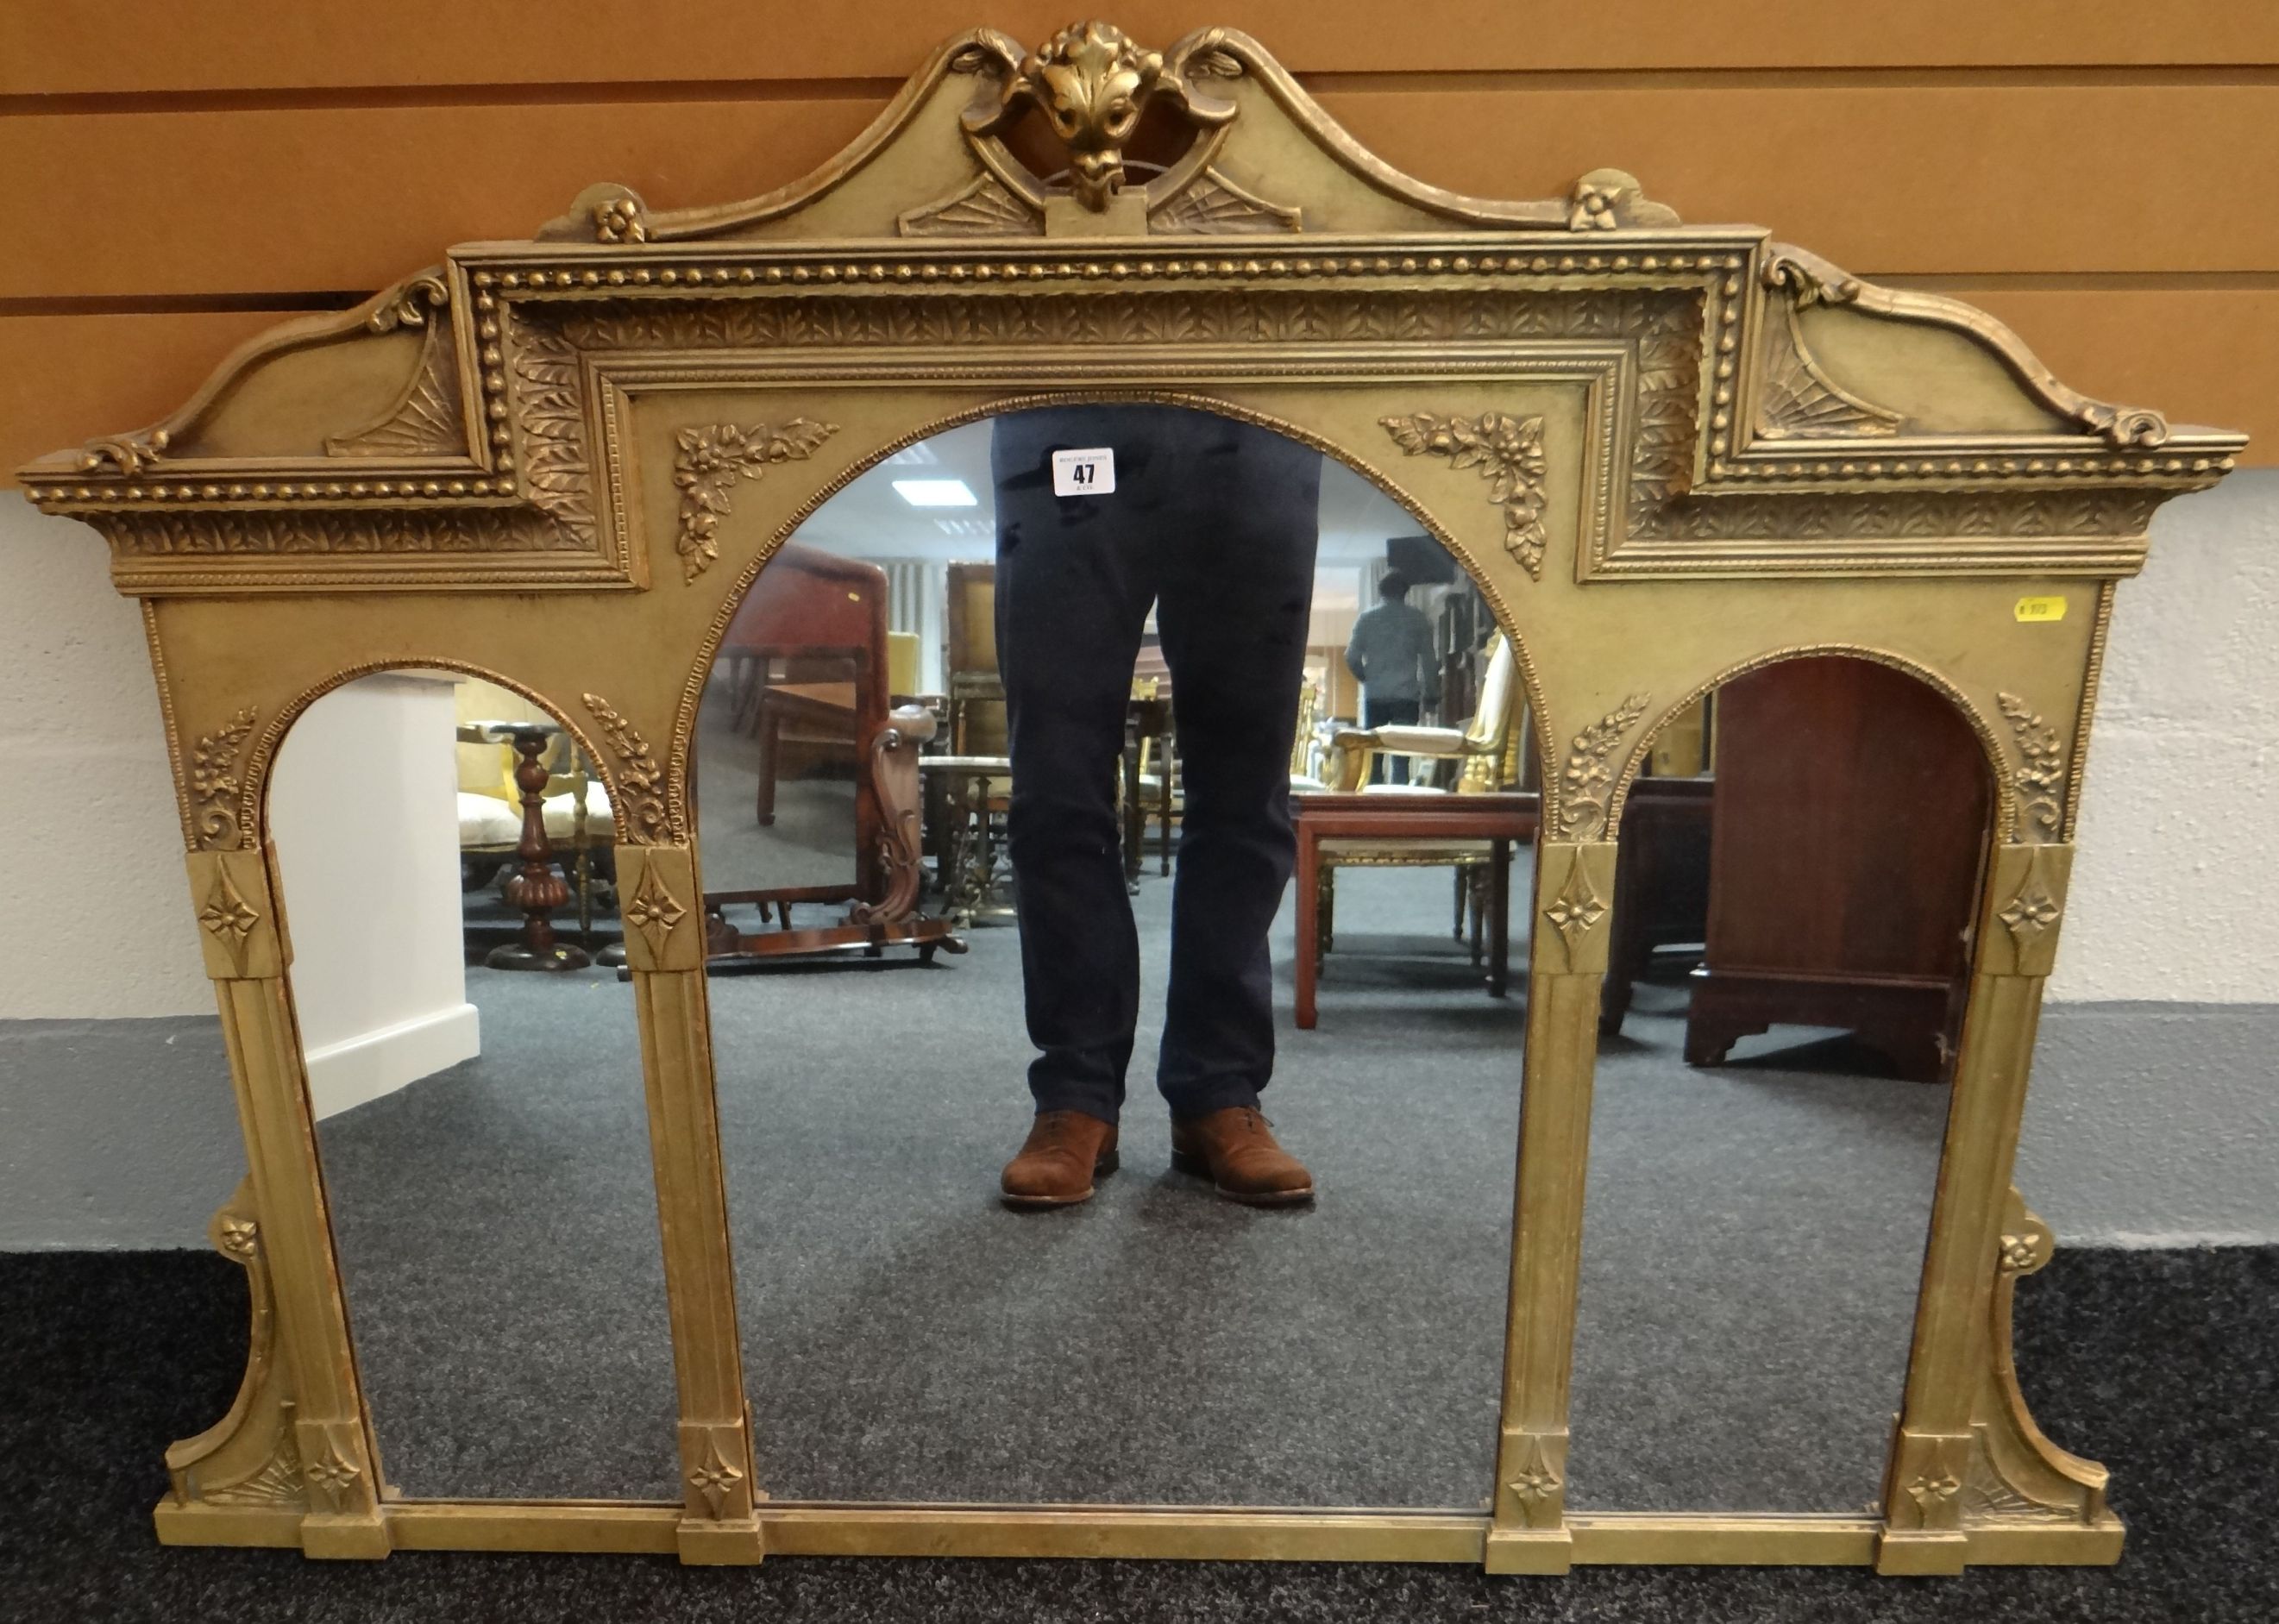 A 20th century elaborately decorated gilt-framed three section wall mirror having three arched